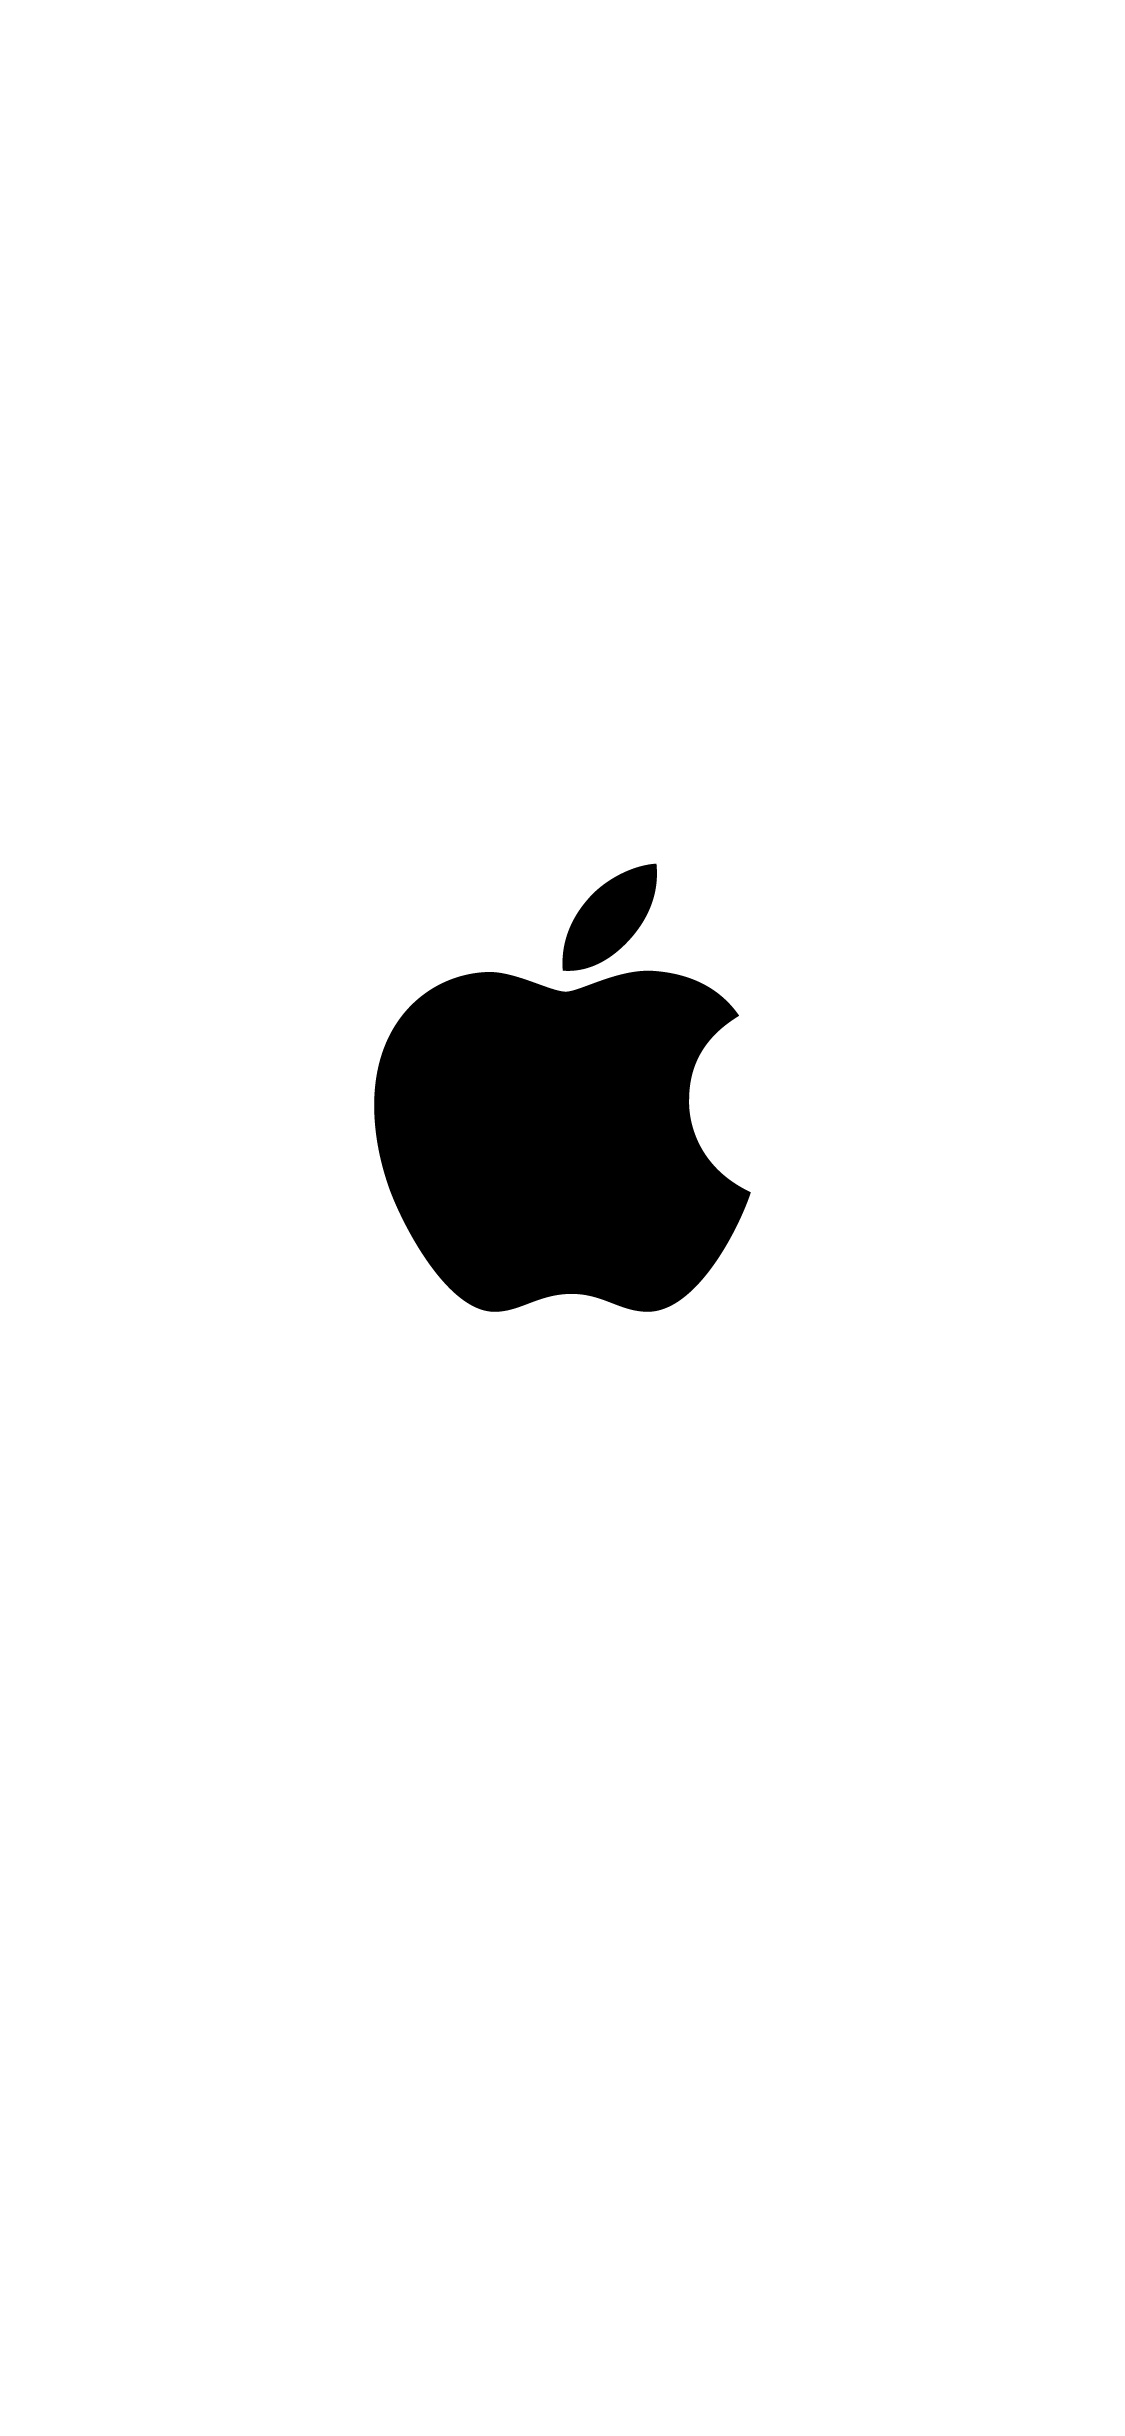 Apple logo, White and black, Timeless elegance, Classic simplicity, 1130x2440 HD Handy